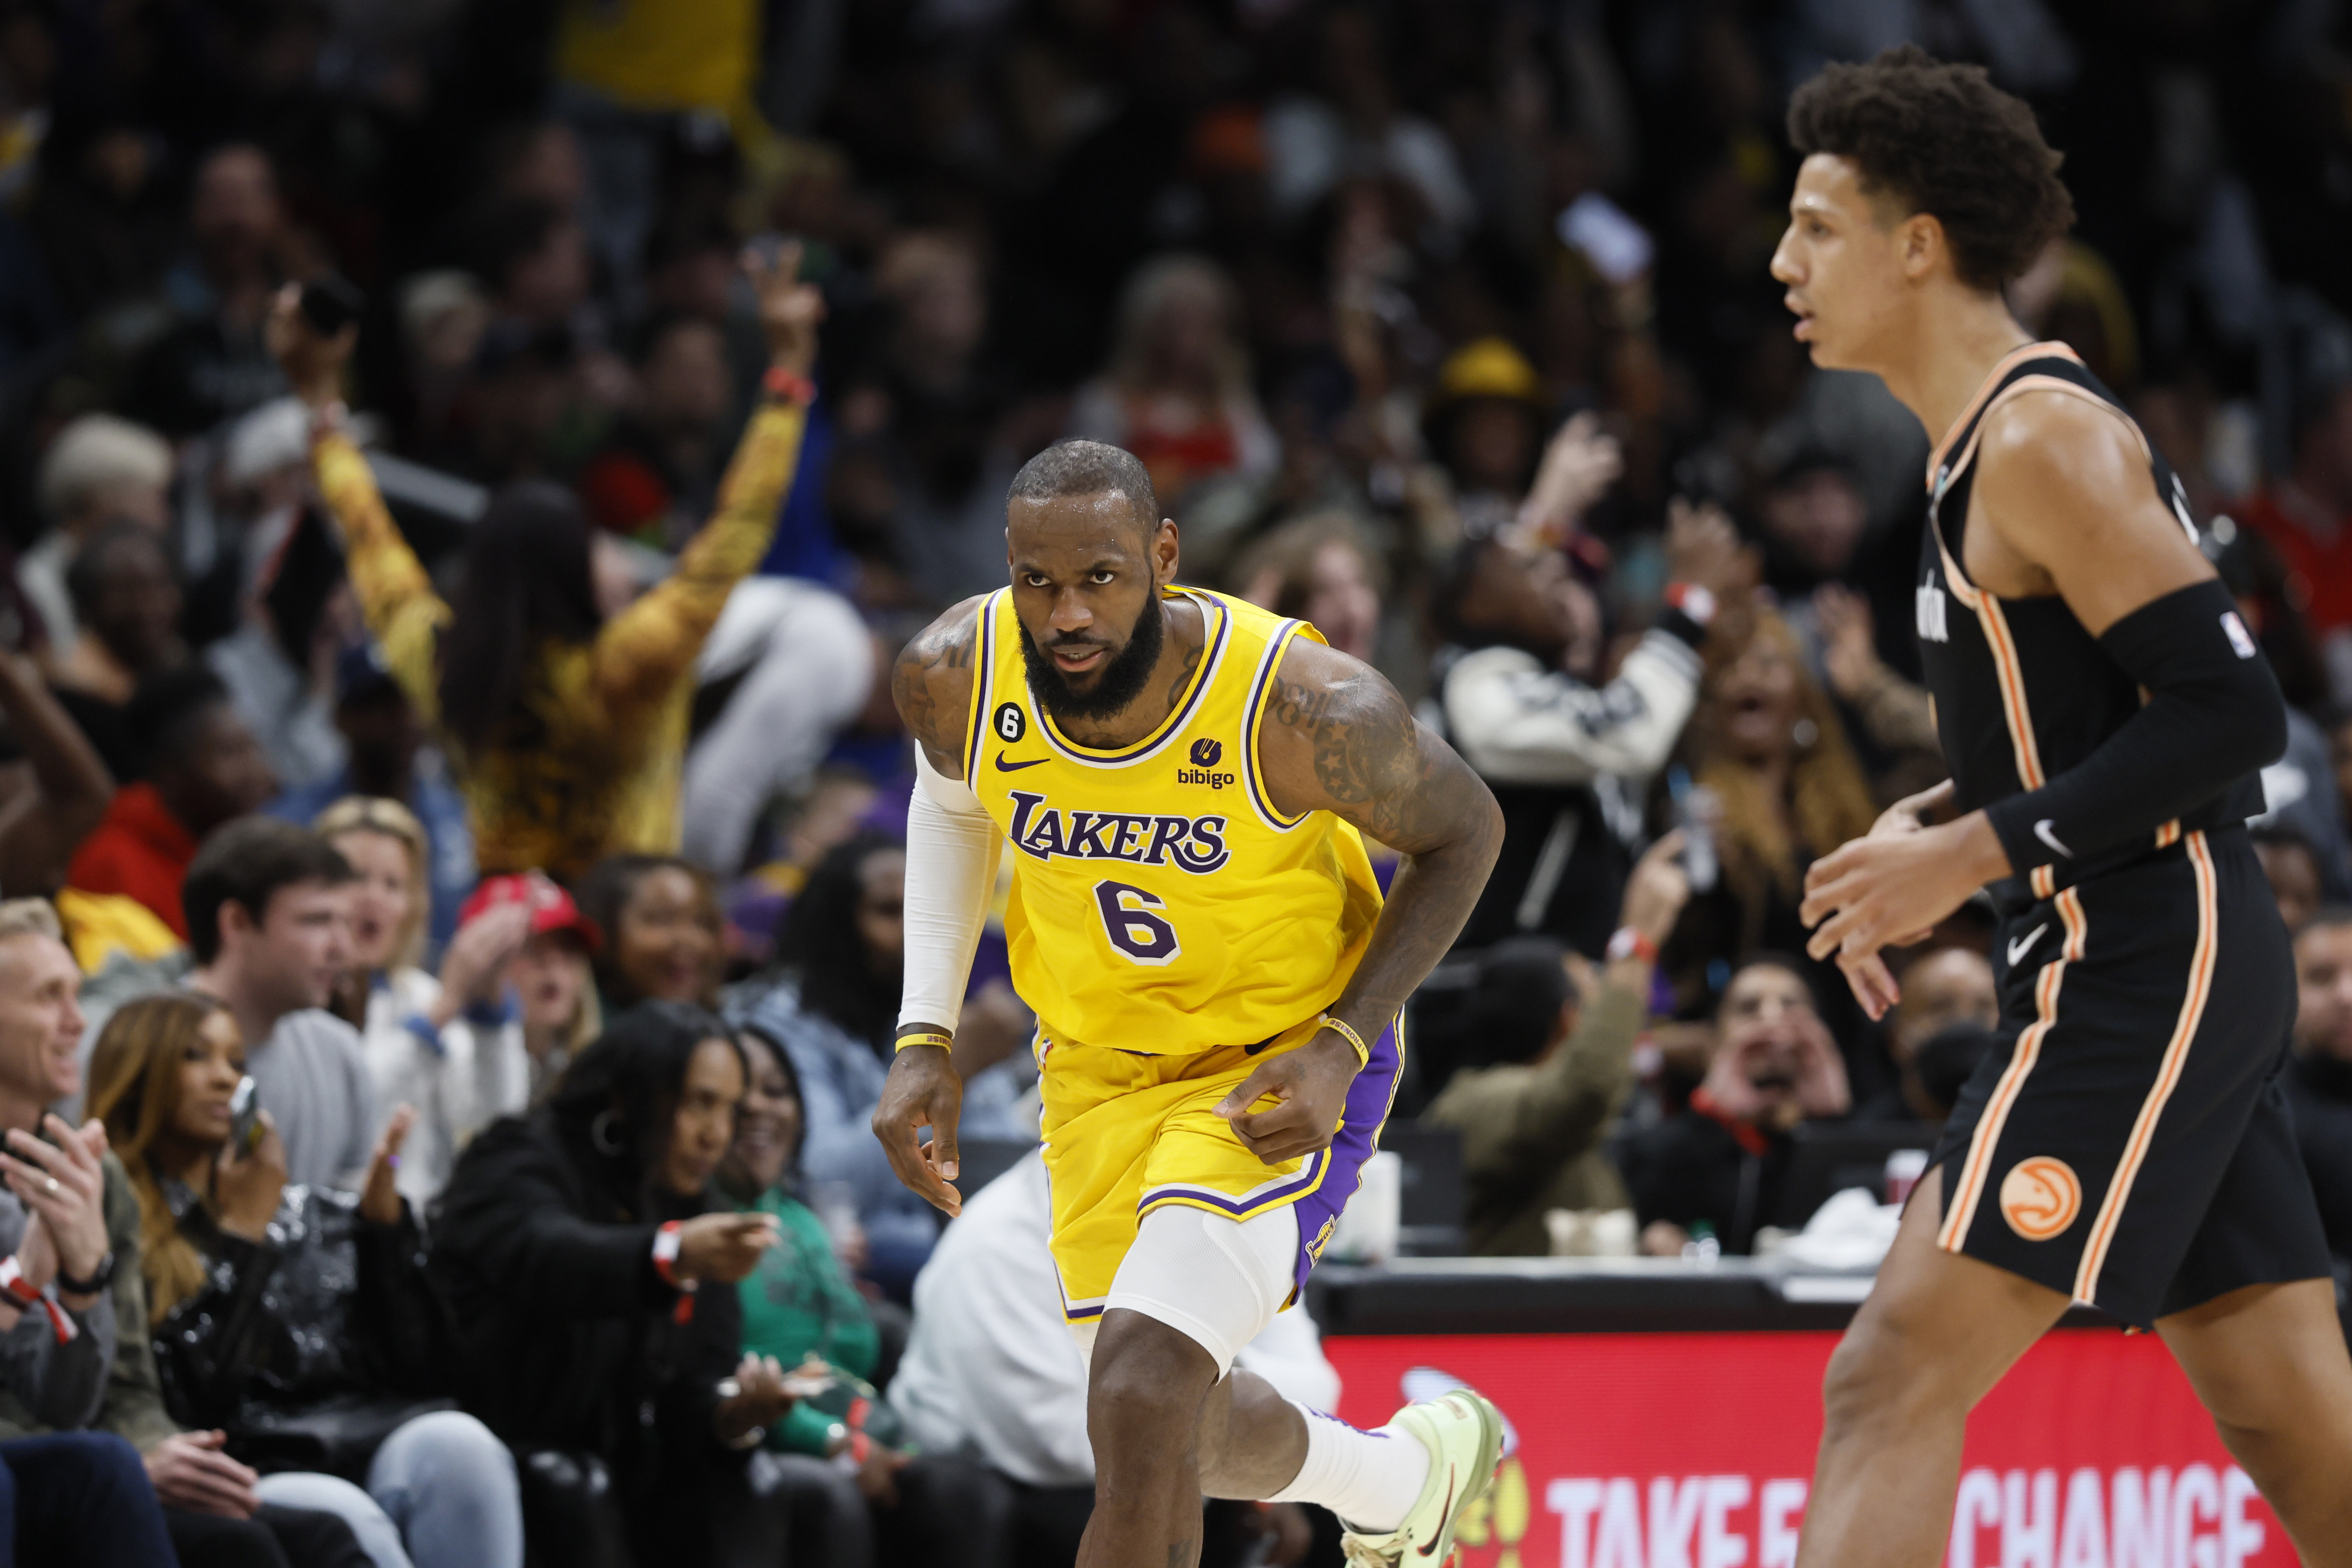 Hawks drop third straight in 130-121 loss to Lakers, LeBron